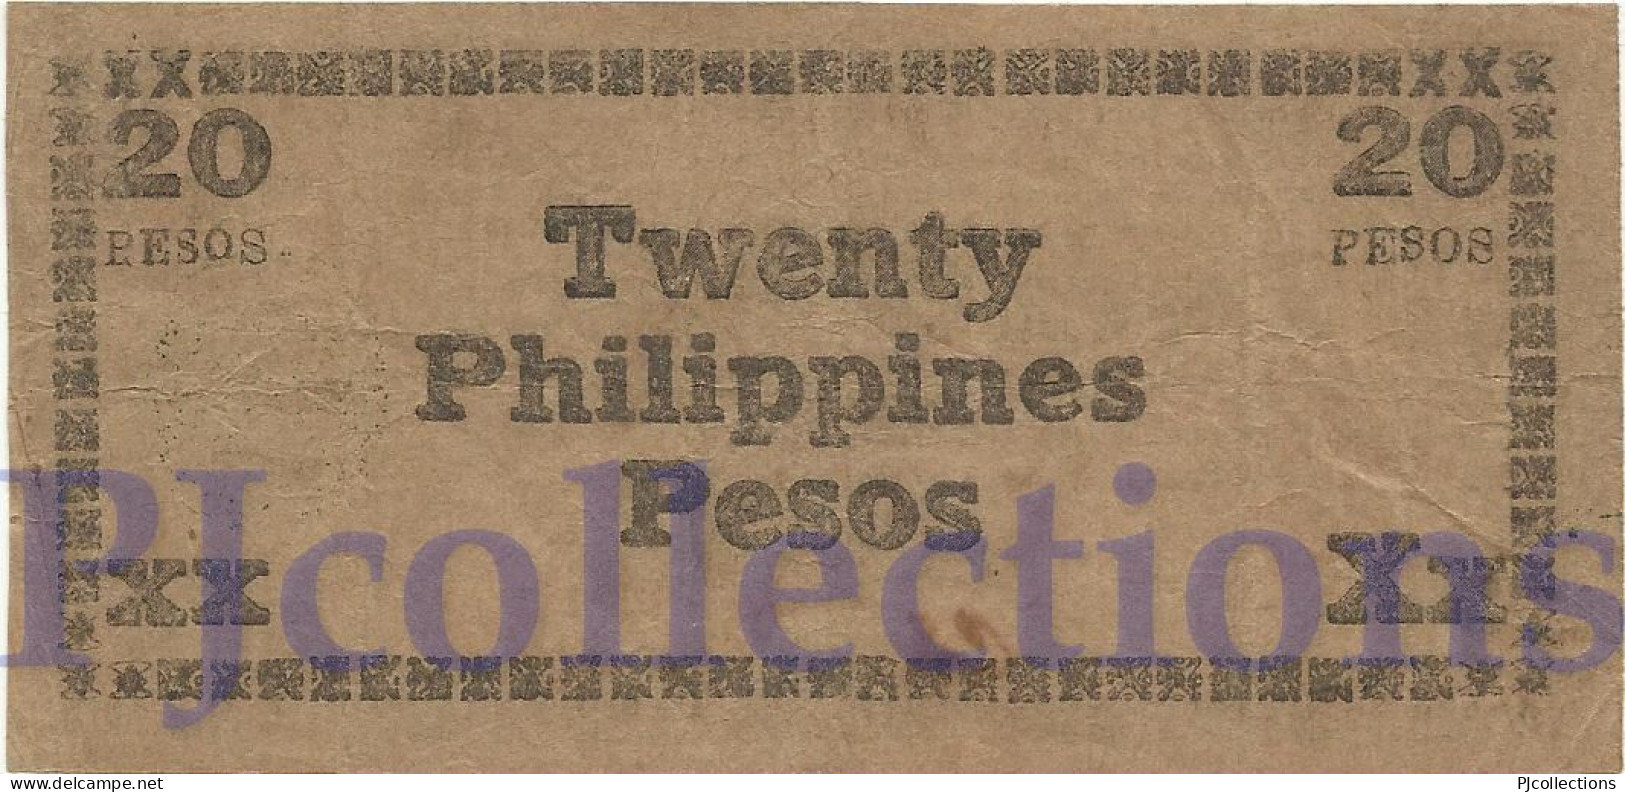 PHILIPPINES 20 PESOS 1944 PICK S680a VF EMERGENCY BANKNOTE - Filippine